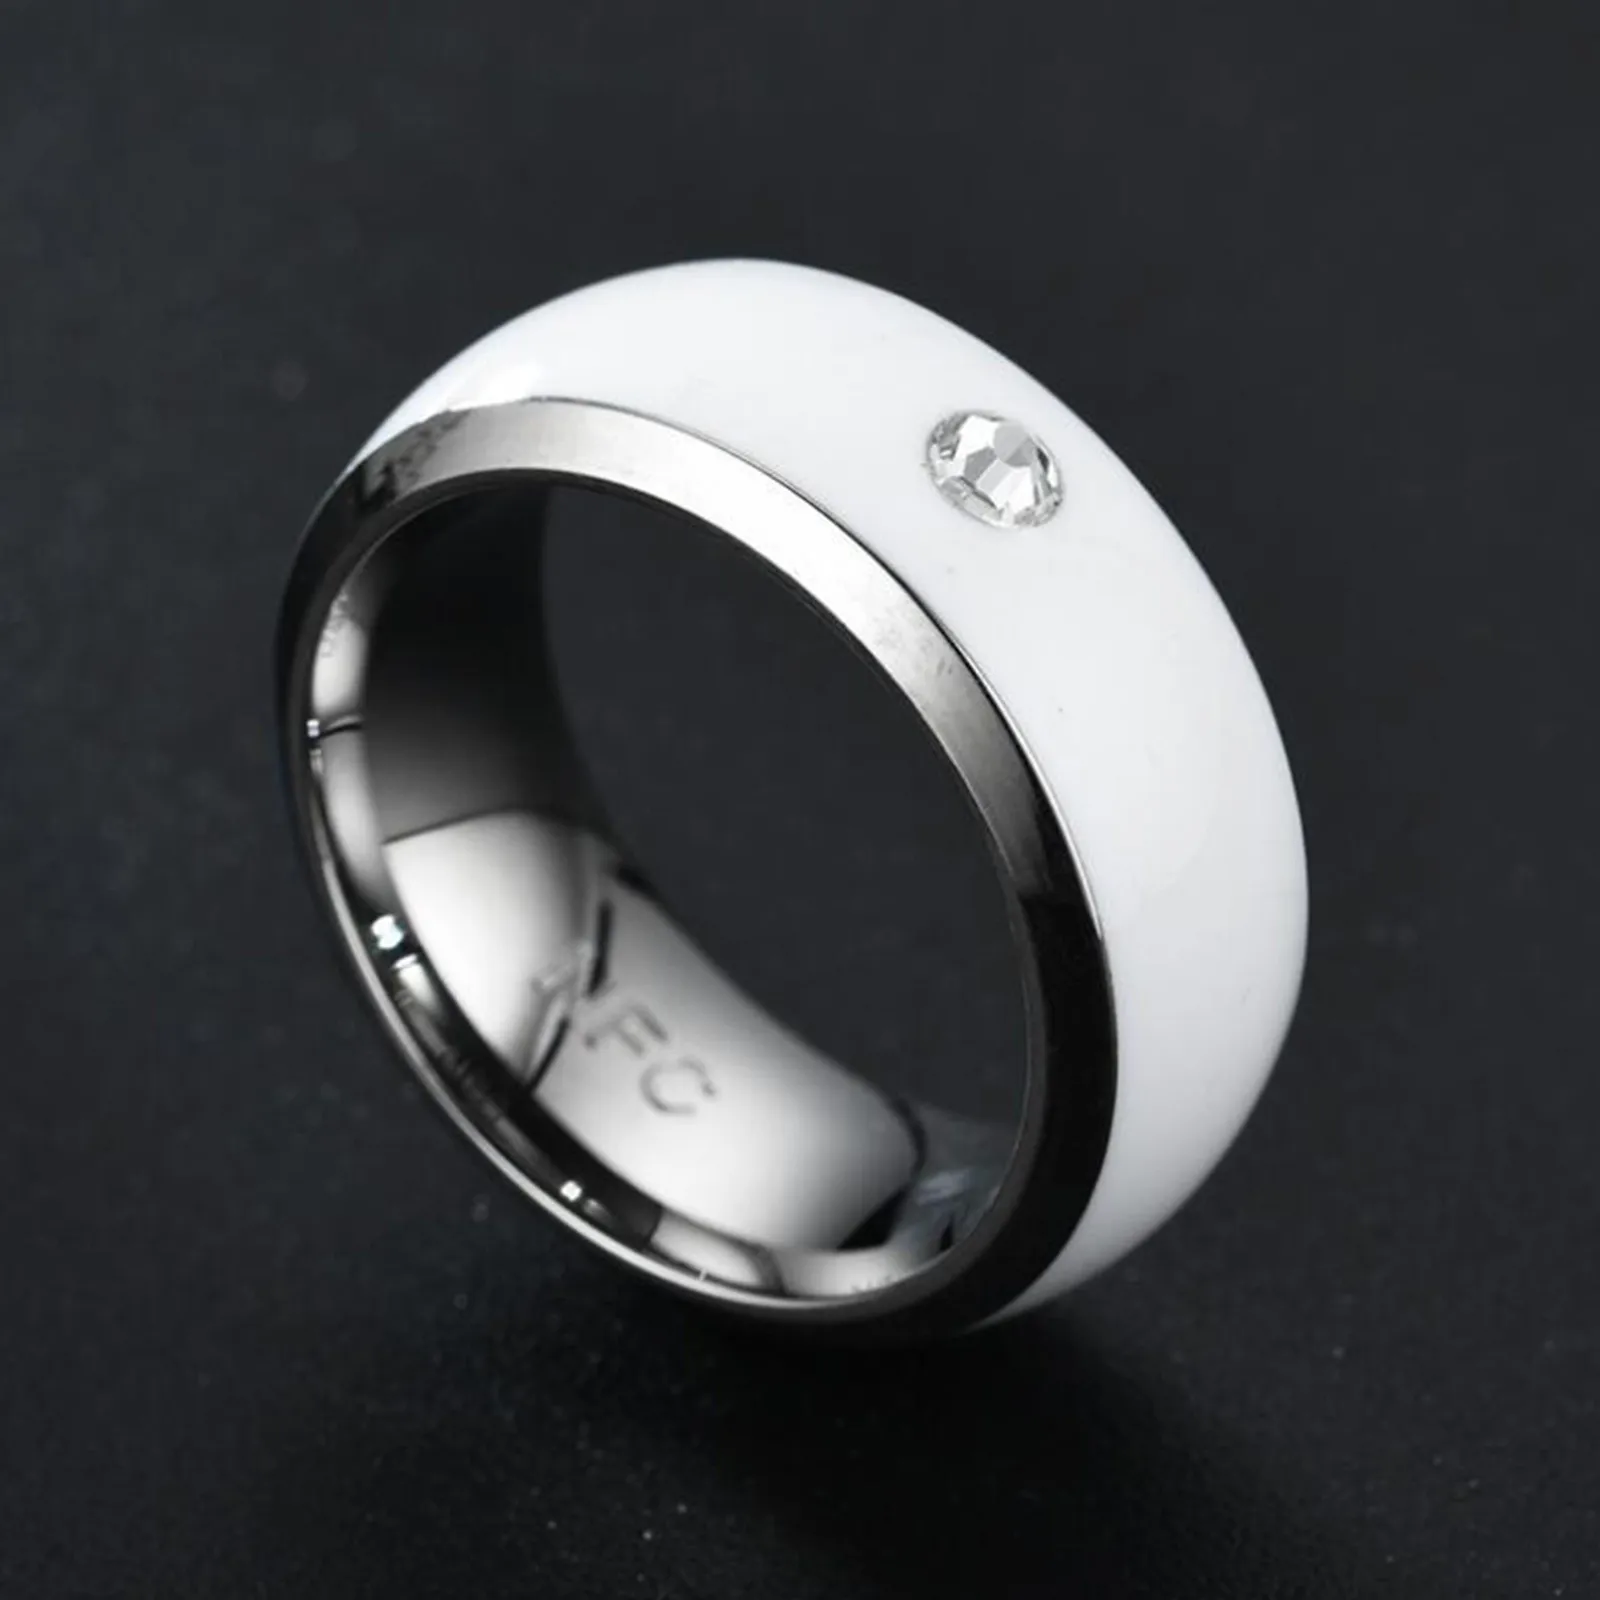 NFC Mobile Phone Smart Ring Stainless Steel Ring Wireless Radio Frequency Communication Water Resistance Jewelry for Women Men 6, Black Smart Ring 